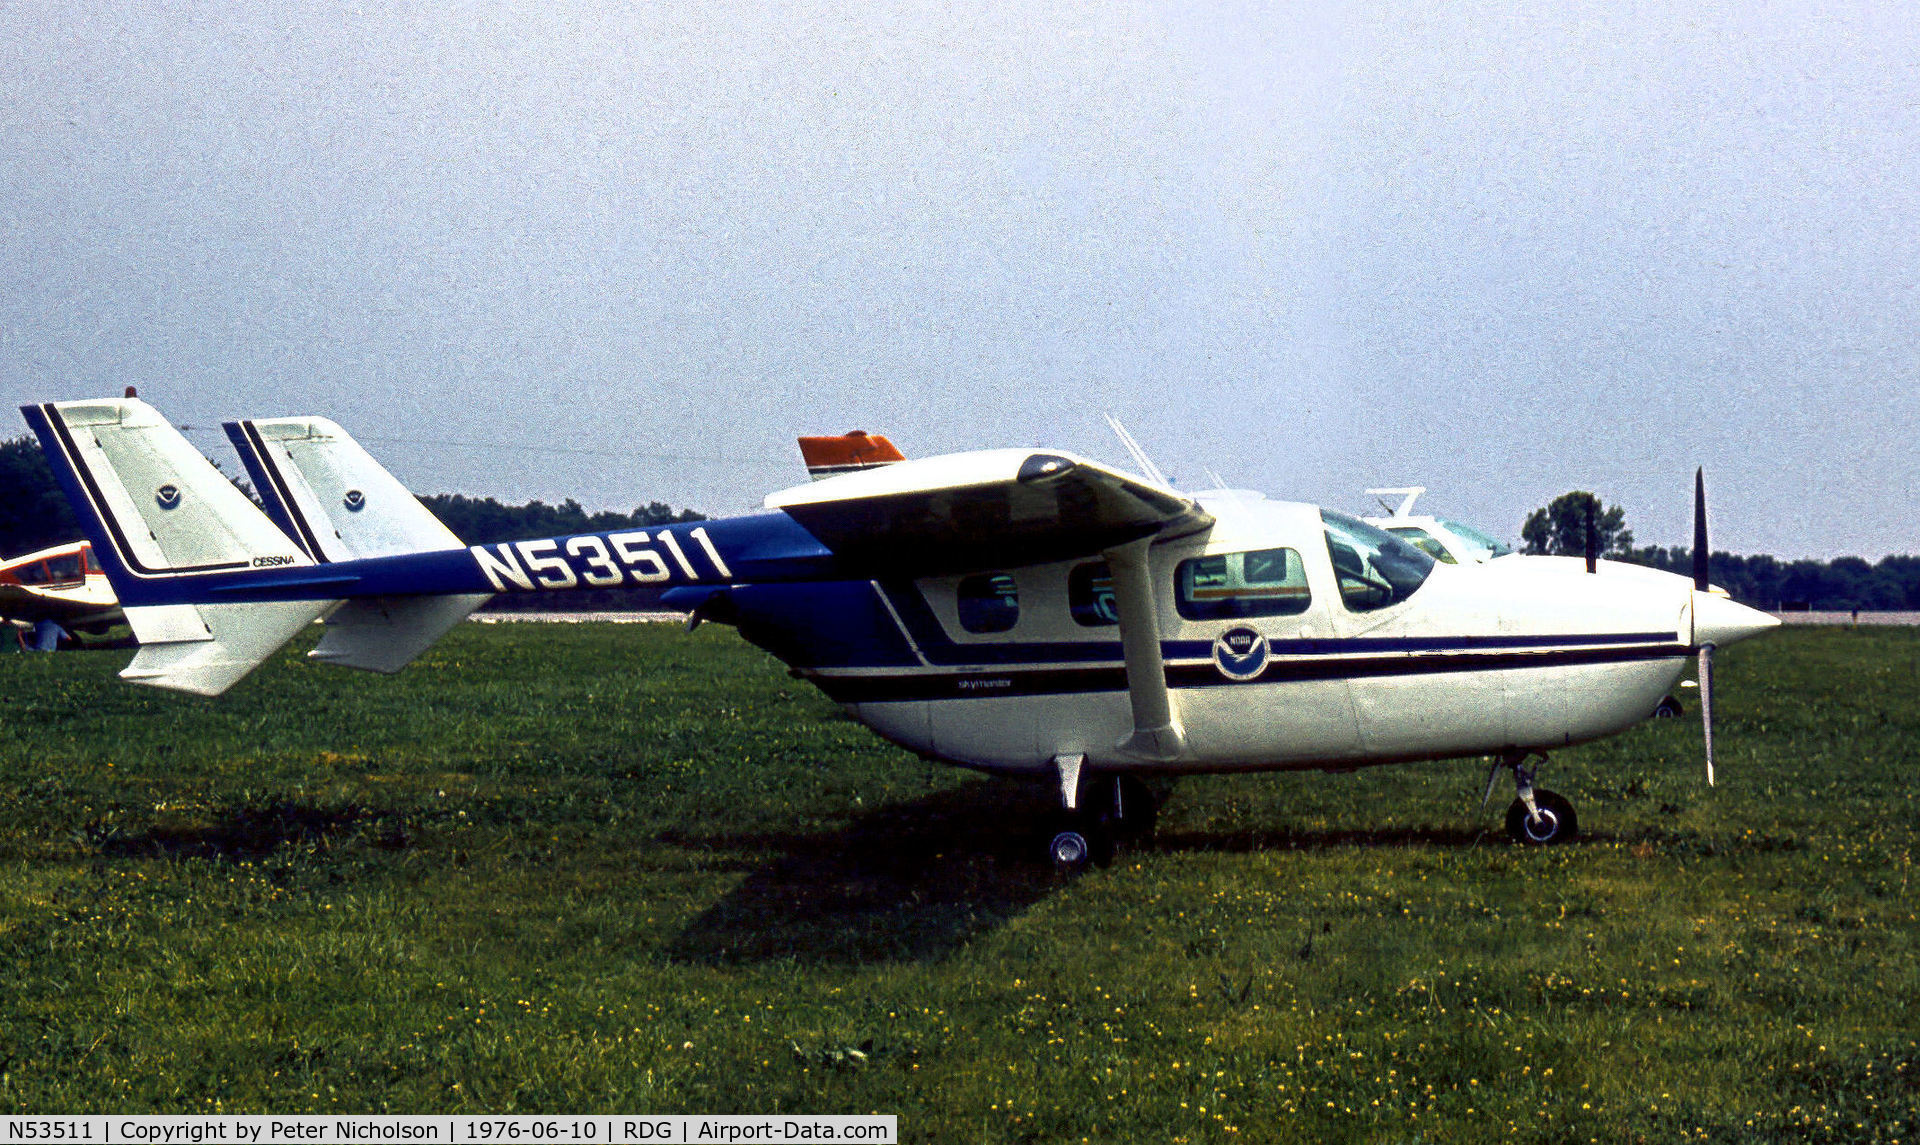 N53511, 1975 Cessna 337G Super Skymaster C/N 33701671, Cessna 337G Super Skymaster on display at the 1976 Reading Airshow.